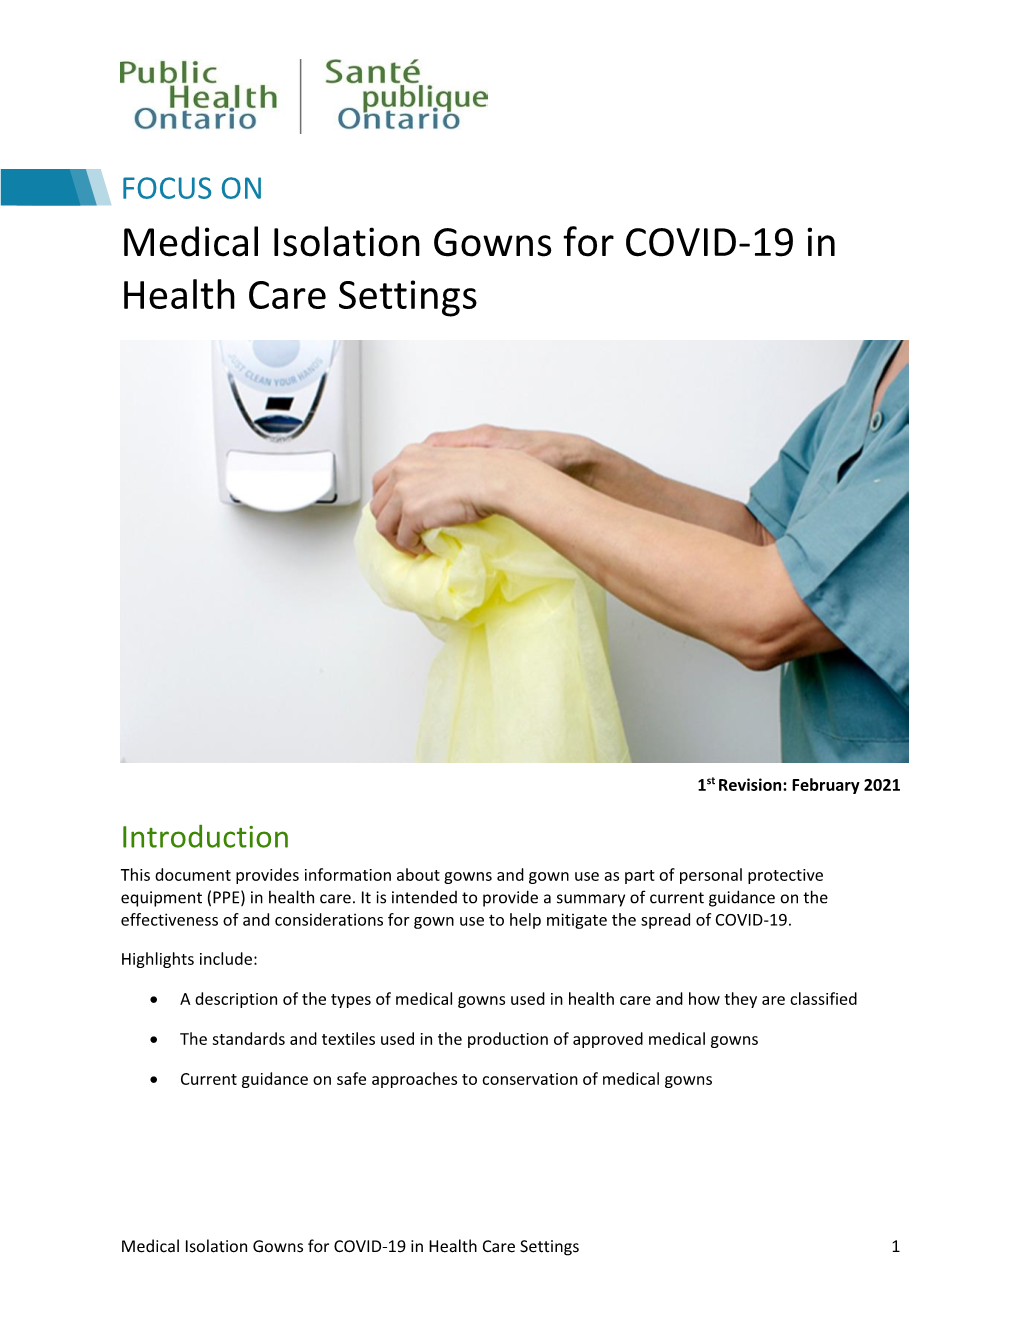 Medical Isolation Gowns for COVID-19 in Health Care Settings